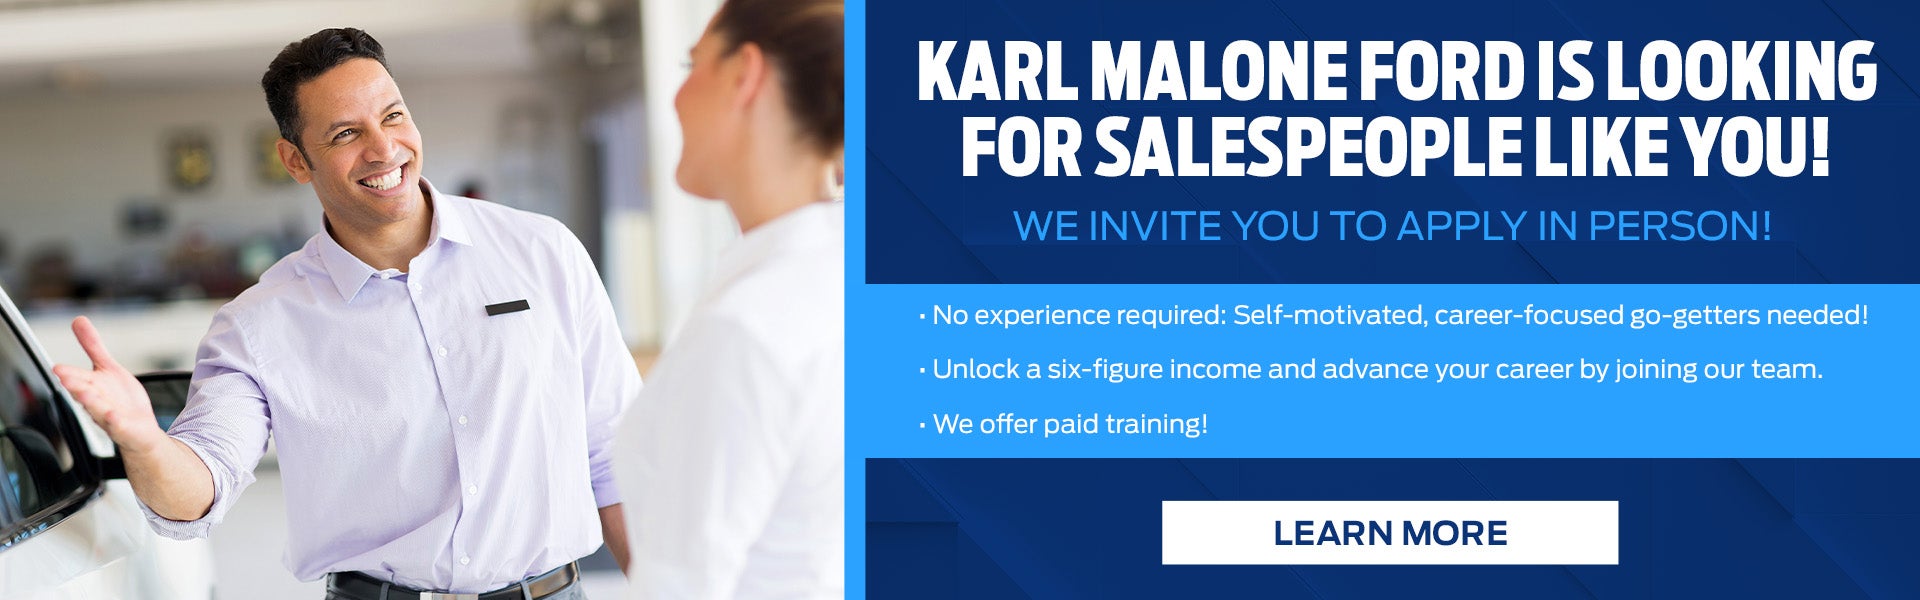 Karl Malone Ford is Hiring